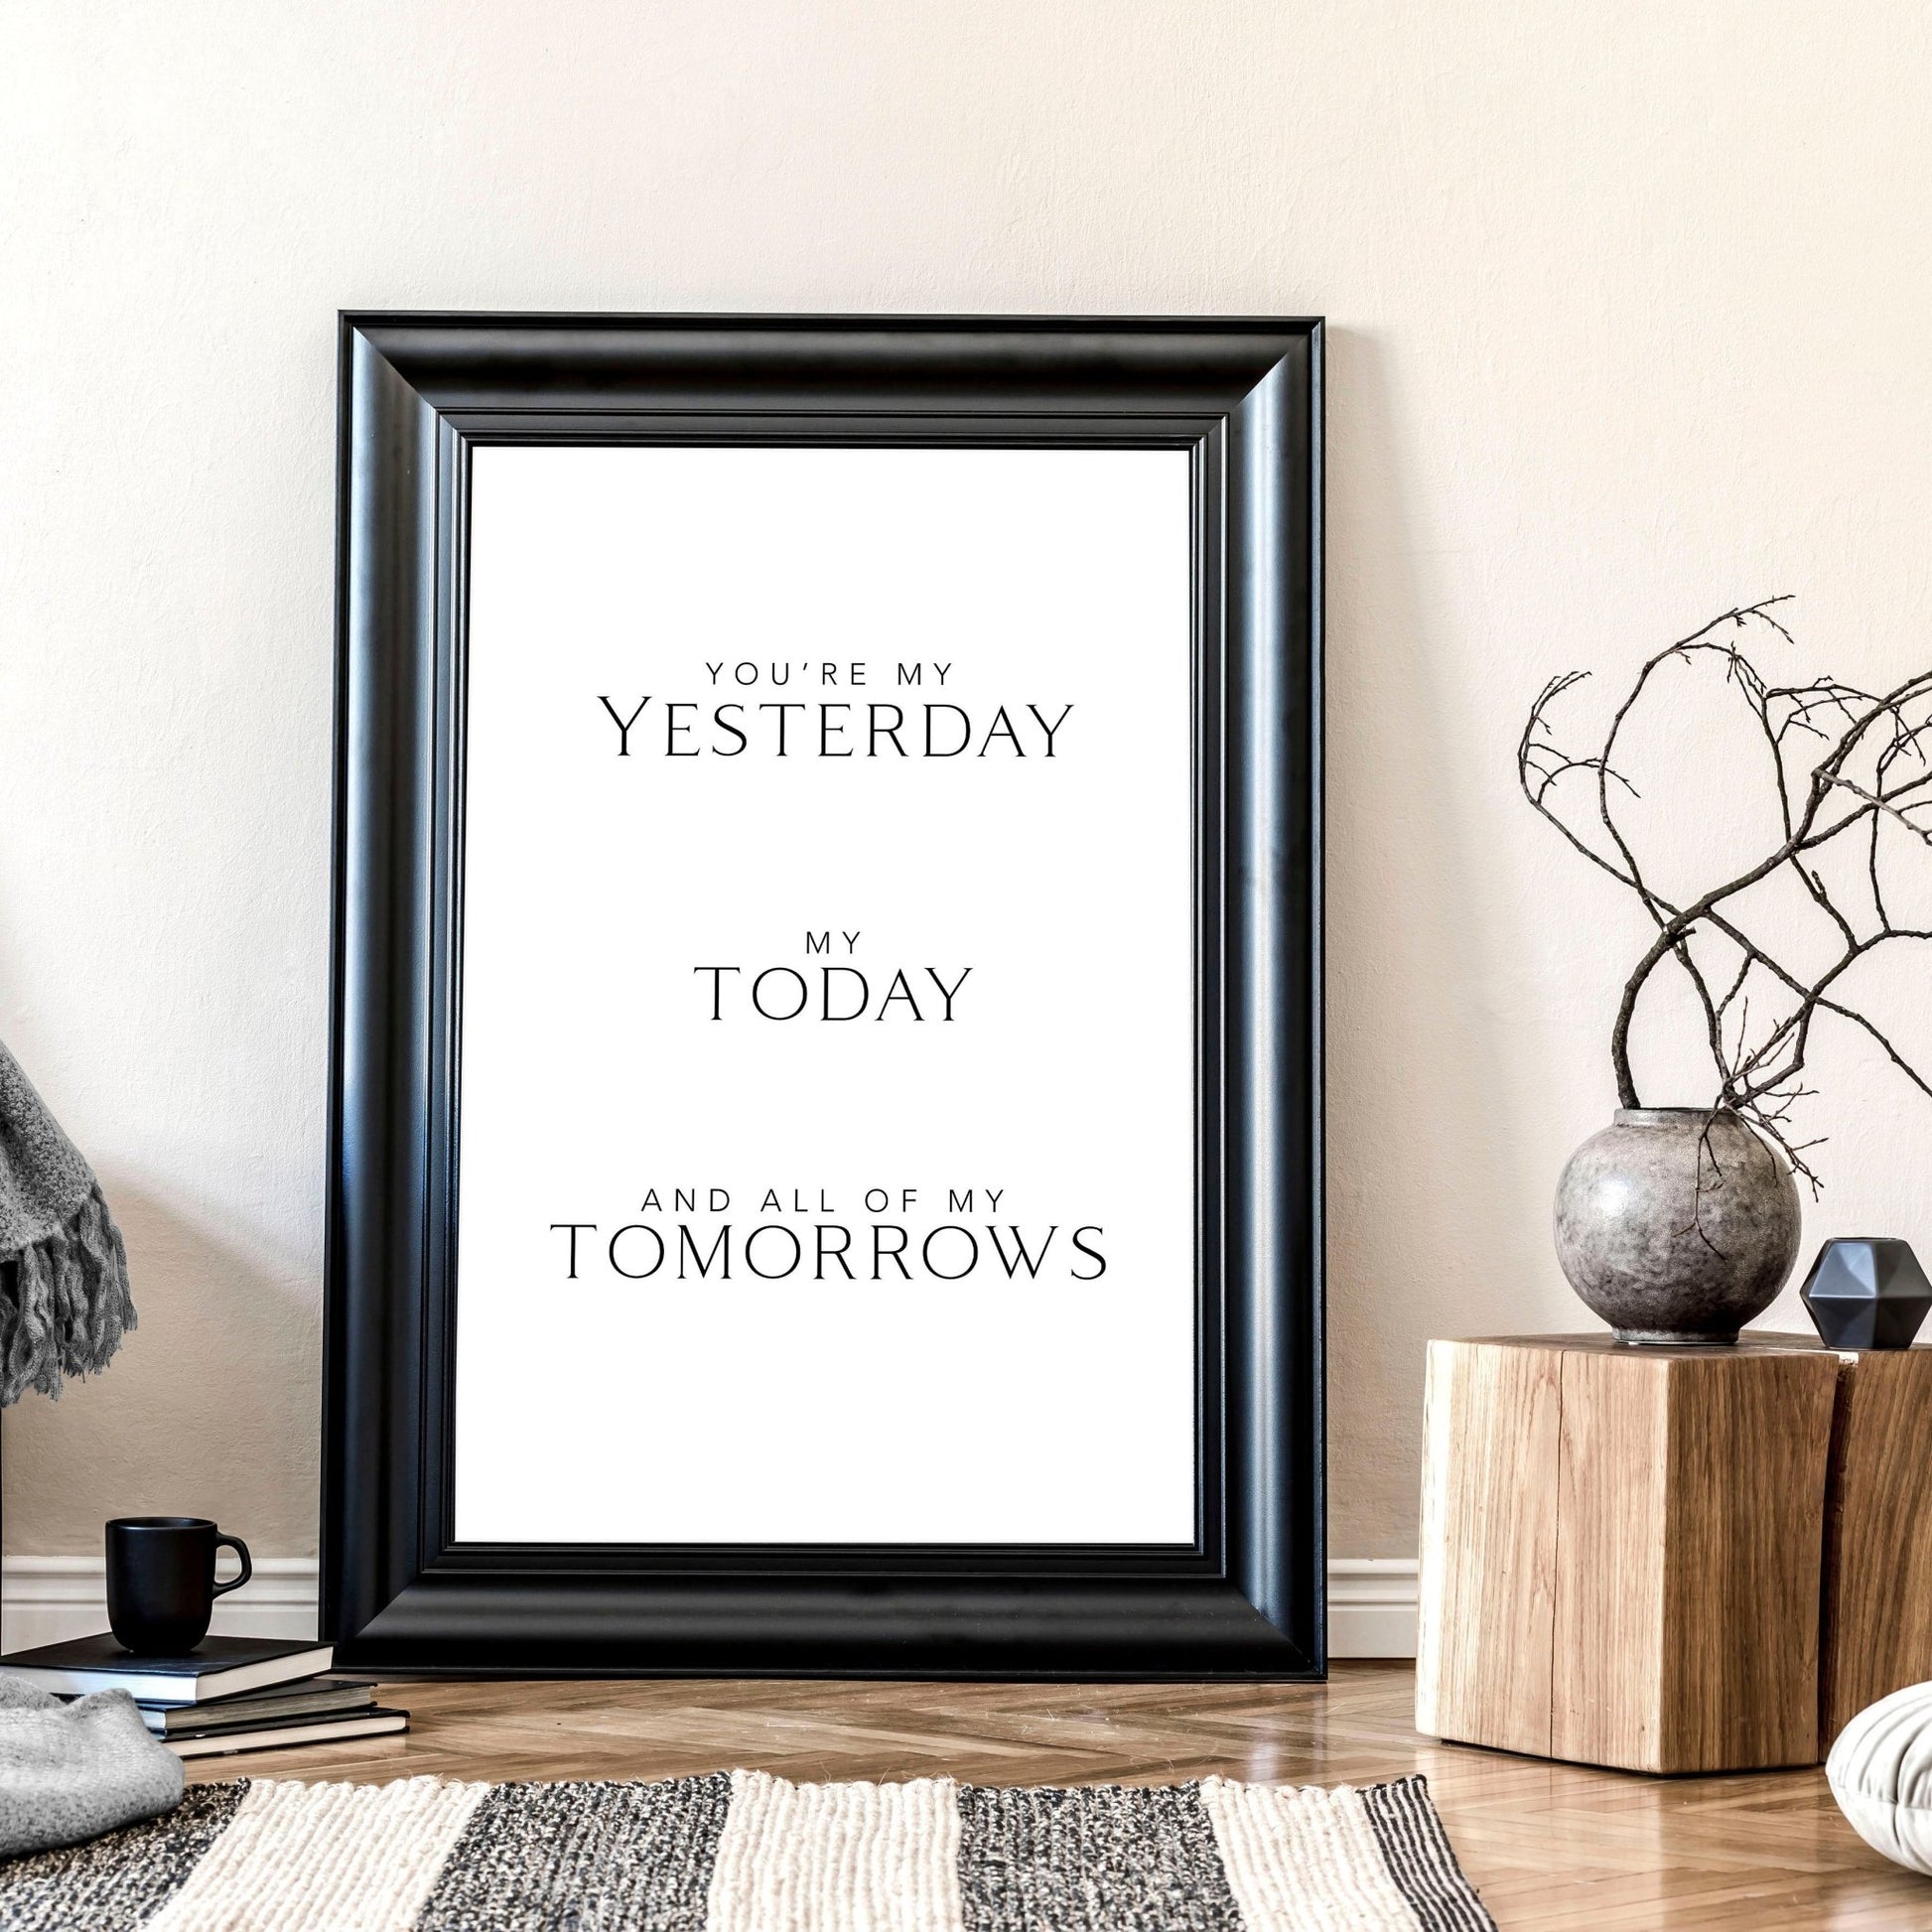 You will forever be my always | wall art print - About Wall Art